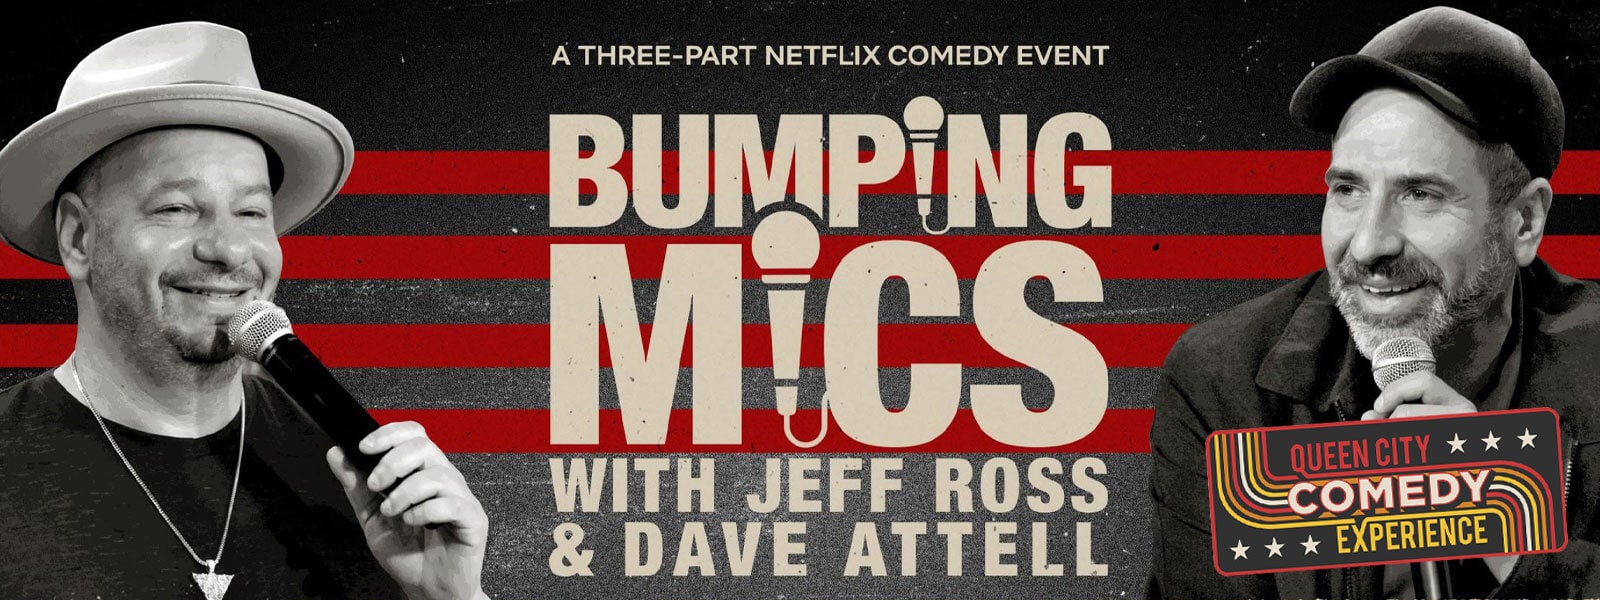 Bumping Mics with Jeff Ross and Dave Attell Blumenthal Performing Arts